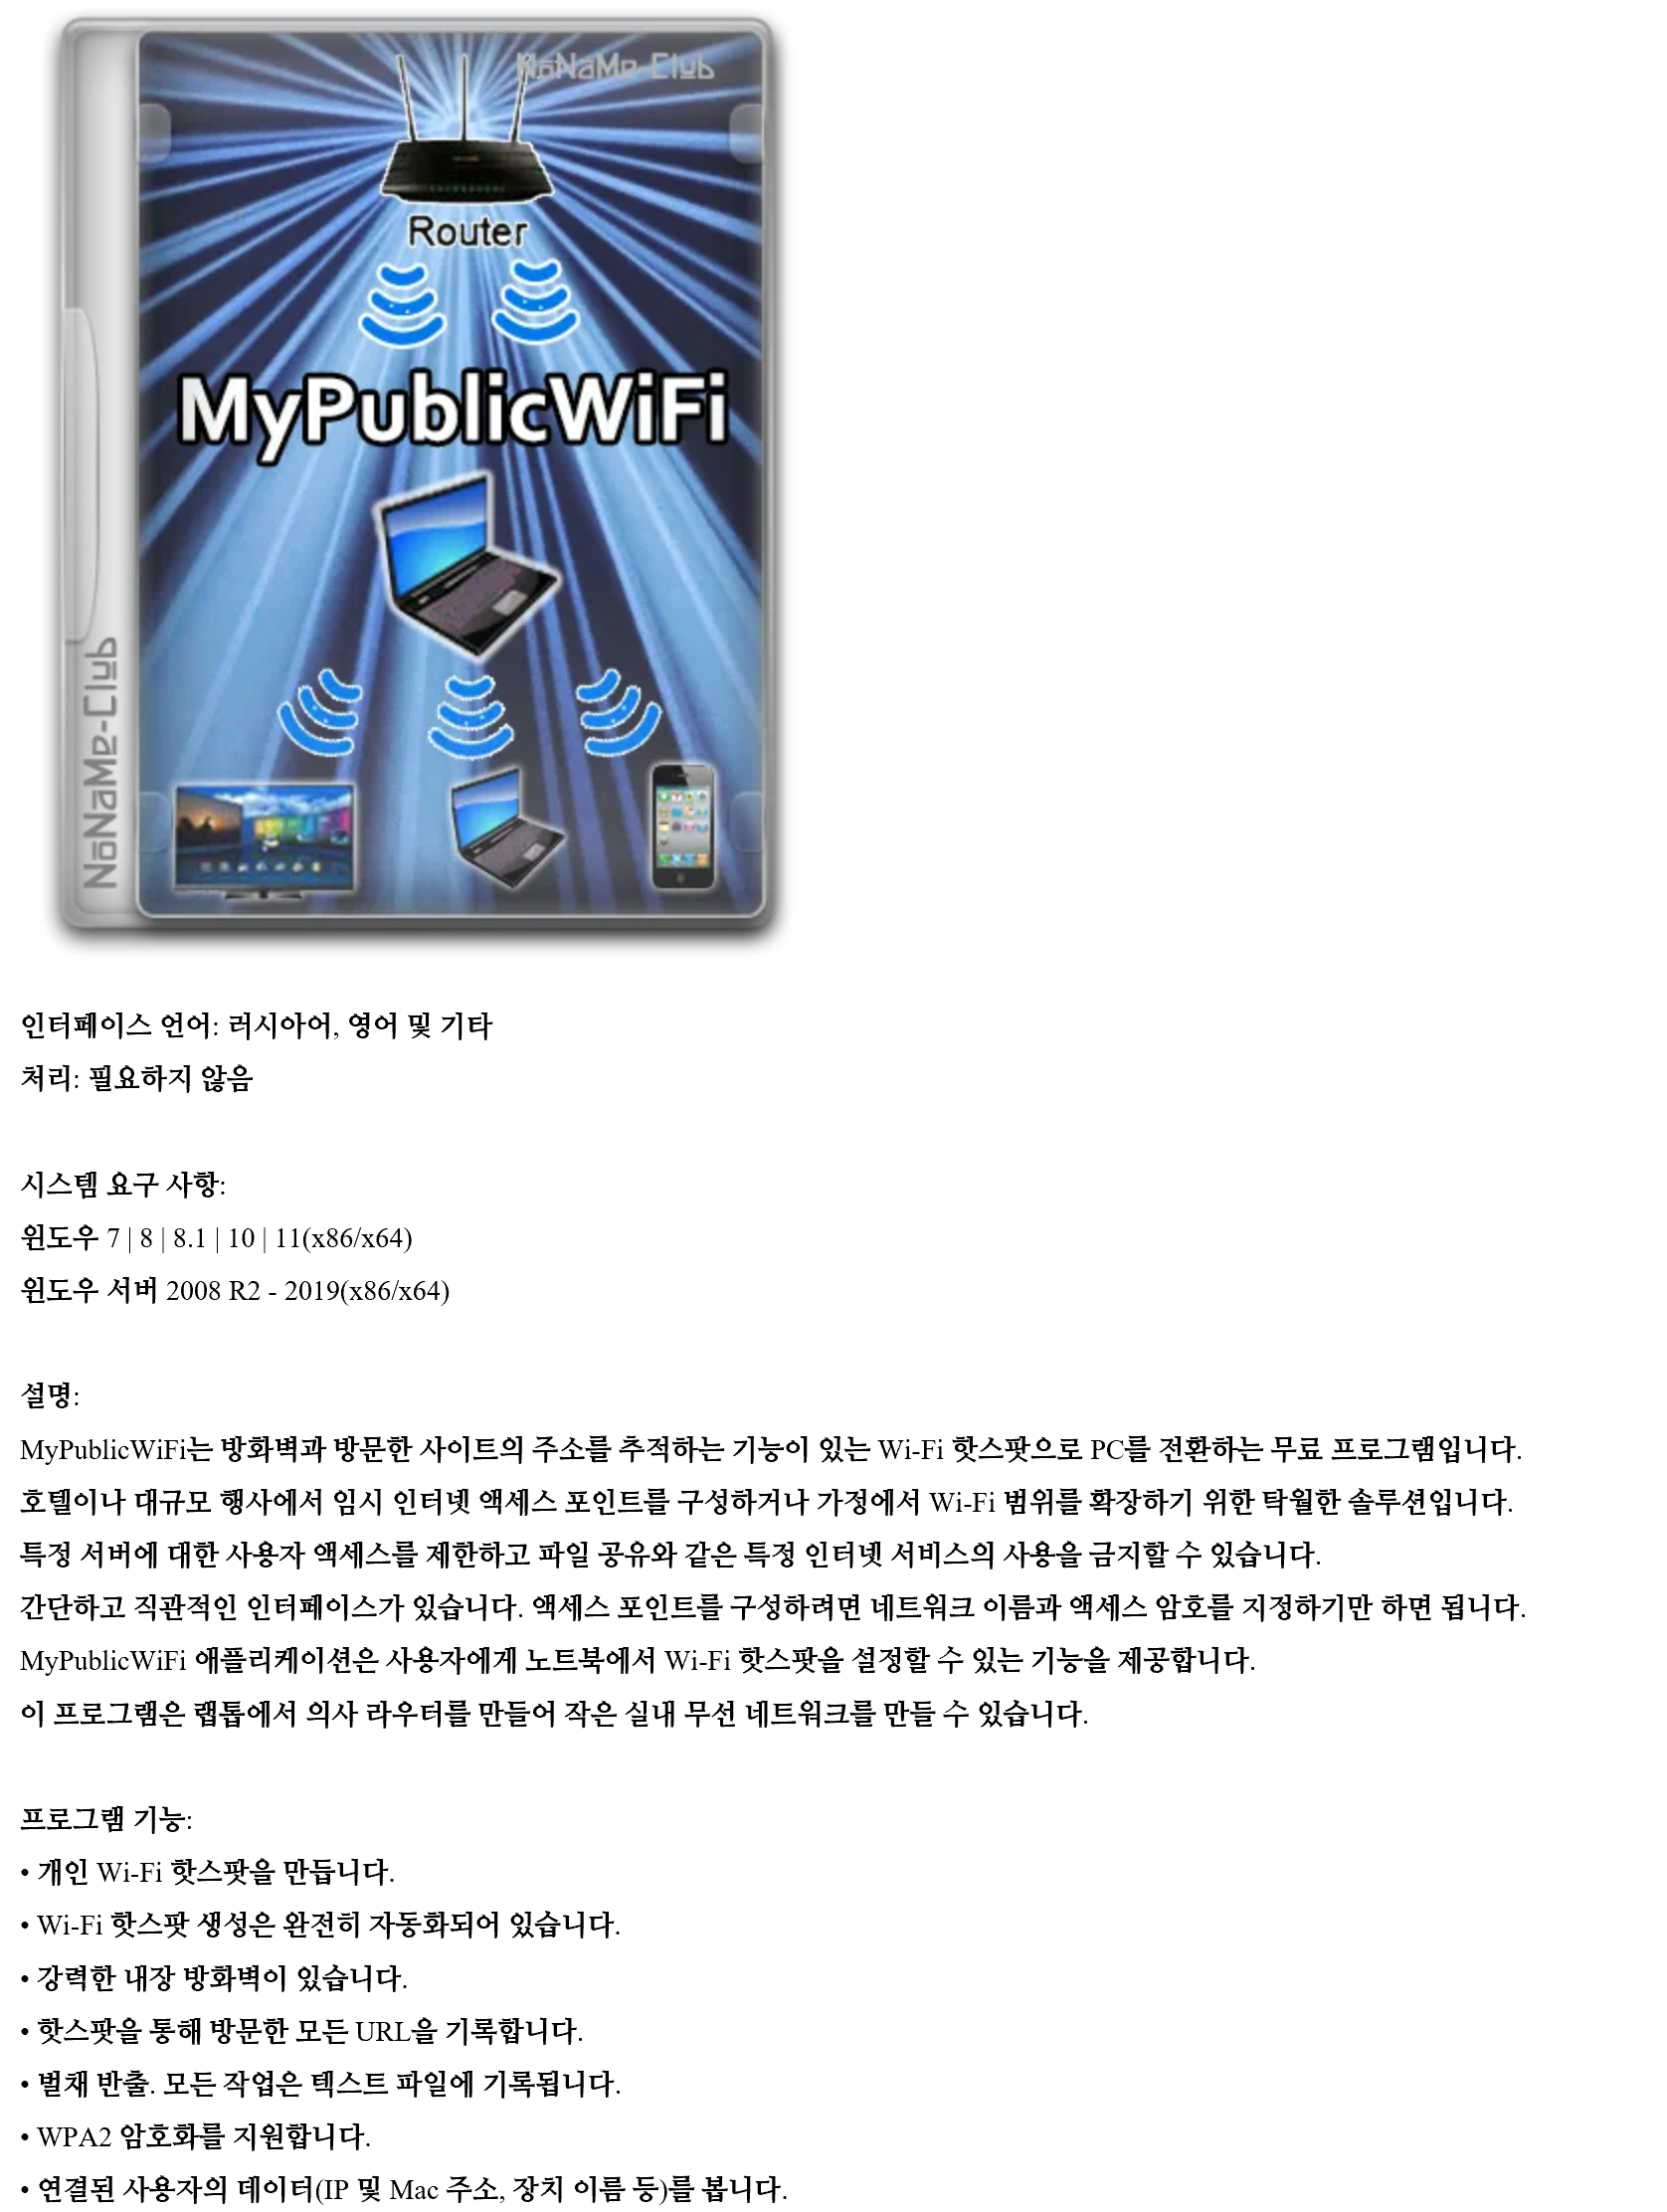 MyPublicWiFi.png